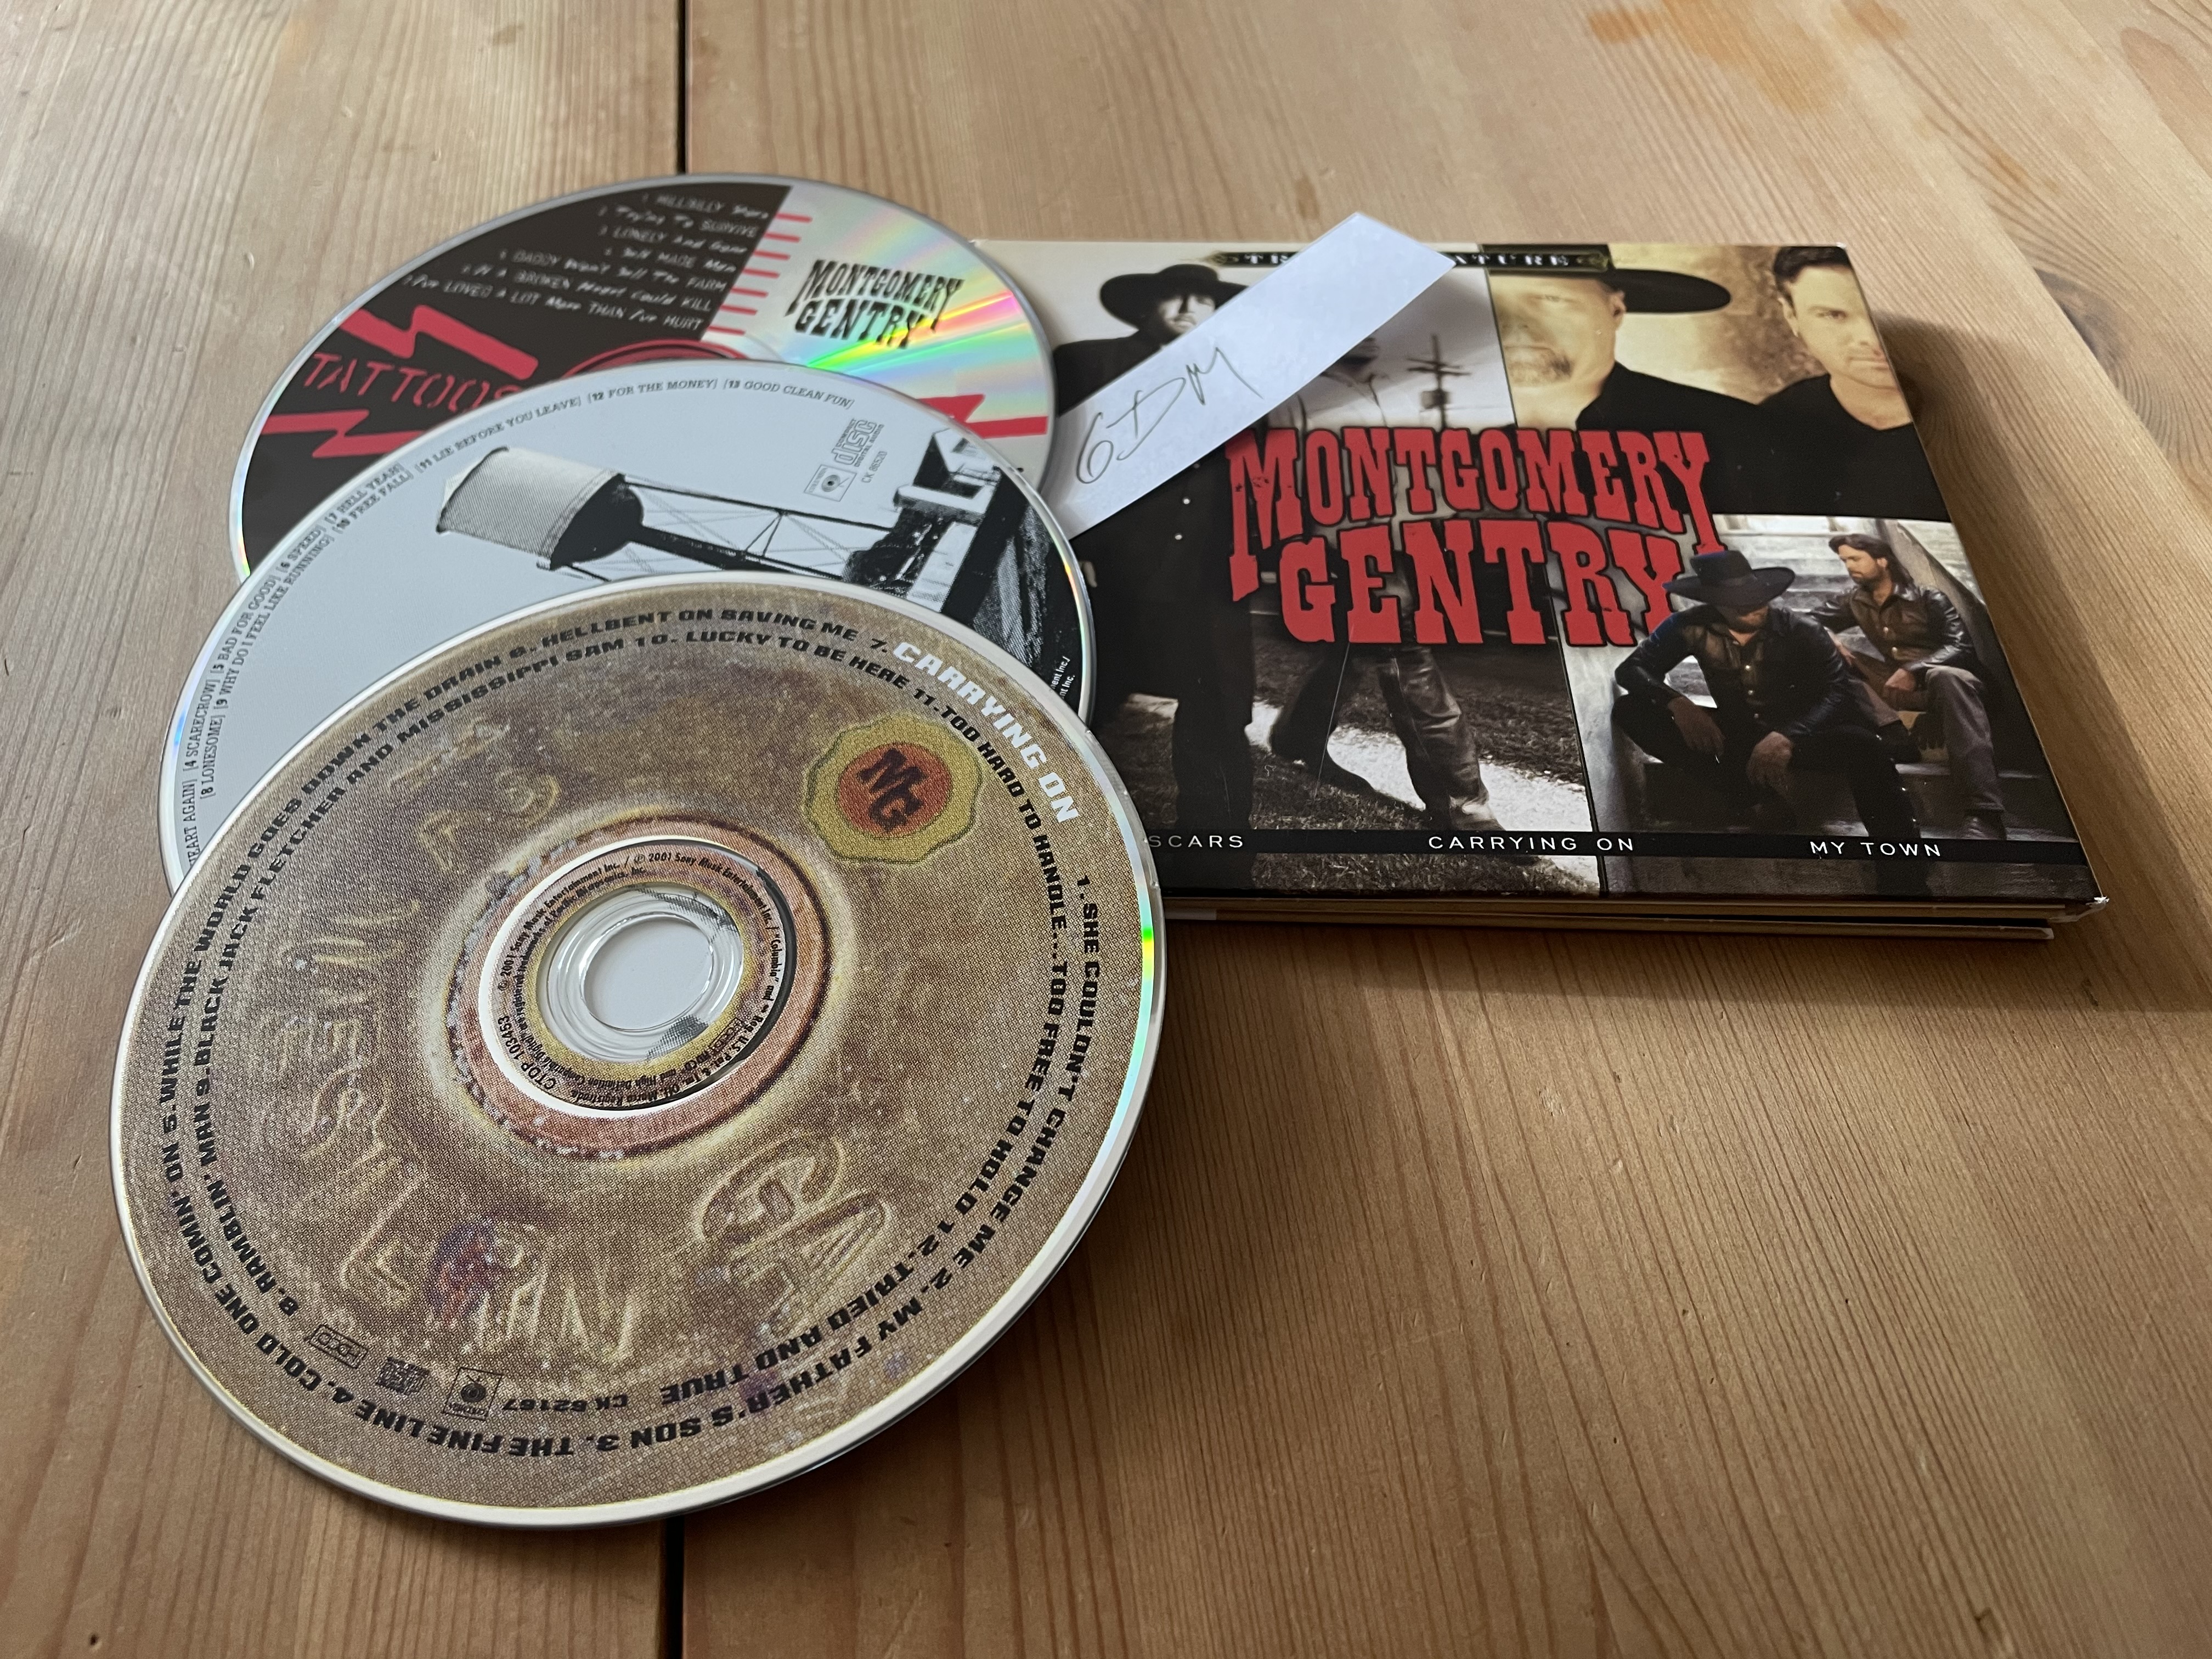 Montgomery Gentry-Triple Feature (Tattoos and Scars Carrying On My Town)-(88697-37189- 2)-3CD-FLAC-2009-6DM Download